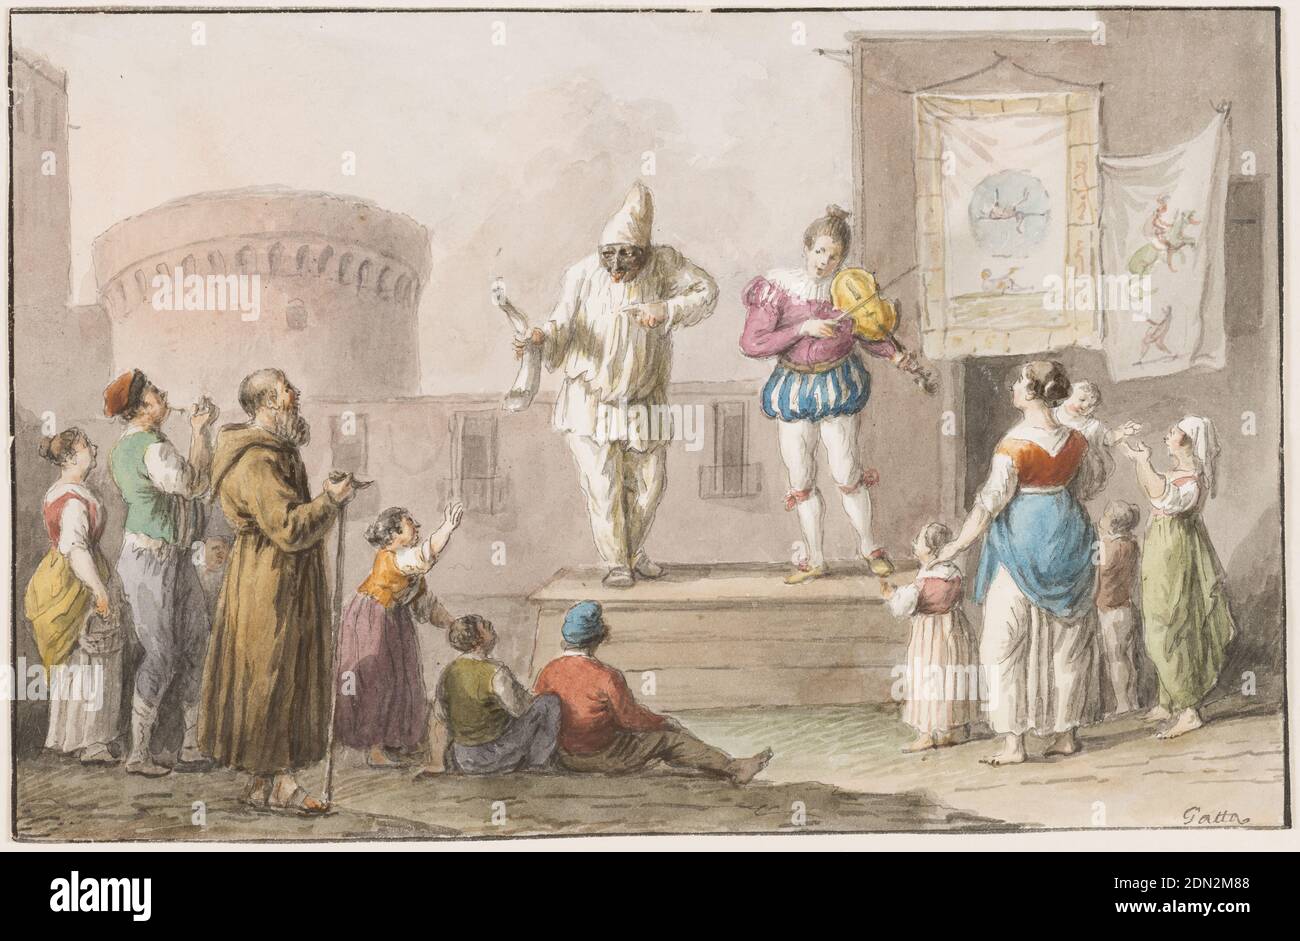 Water Color Performers Of A Commedia Dell Arte Saverio Della Gatta Italian 1777 19 Pen And Black Ink And Water Colors On Paper Horizontal Rectangle Pulcinella Carrying A Horn In His Right